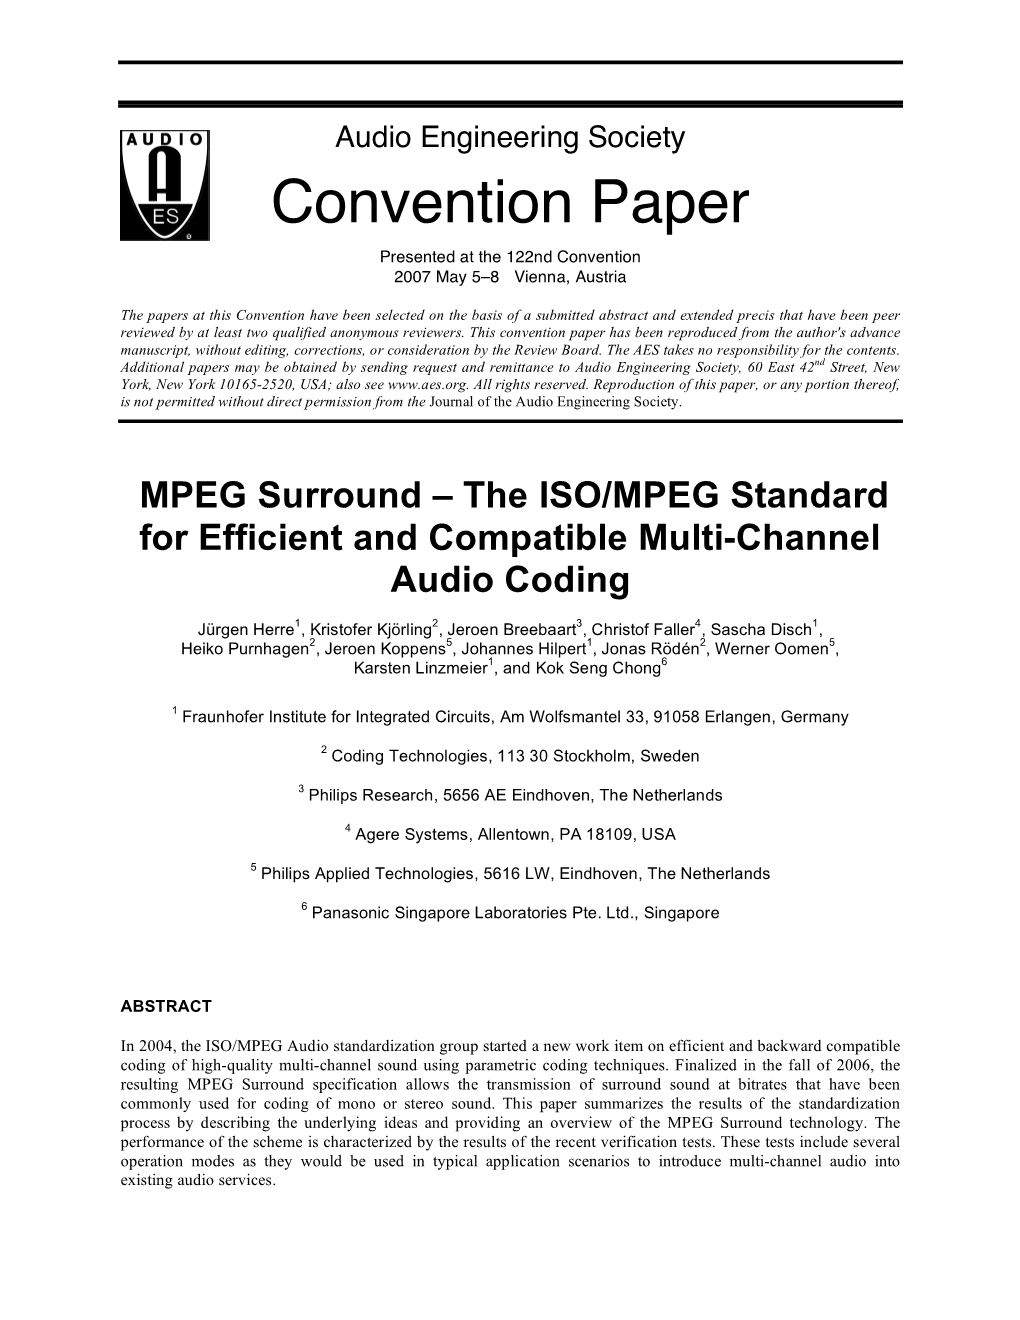 MPEG Surround – the ISO/MPEG Standard for Efficient and Compatible Multi-Channel Audio Coding